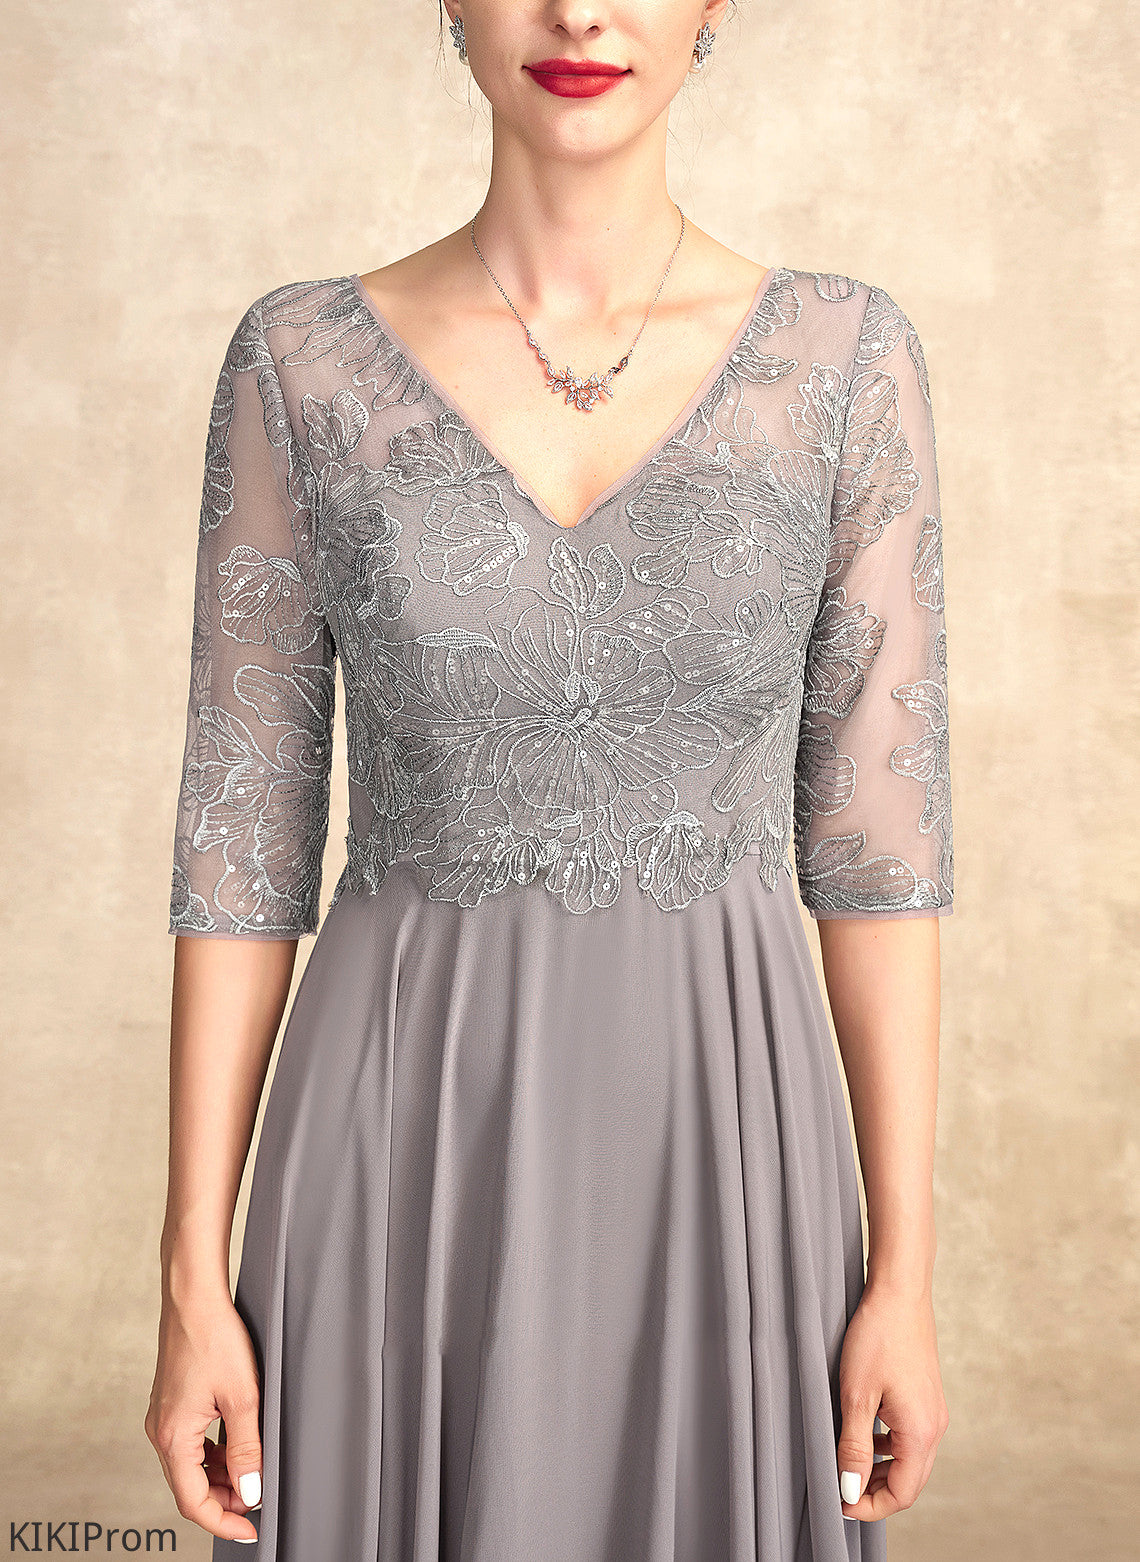 Chiffon With A-Line Lace Mother of the Bride Dresses Mother of Bride Floor-Length V-neck Brianna Sequins the Dress